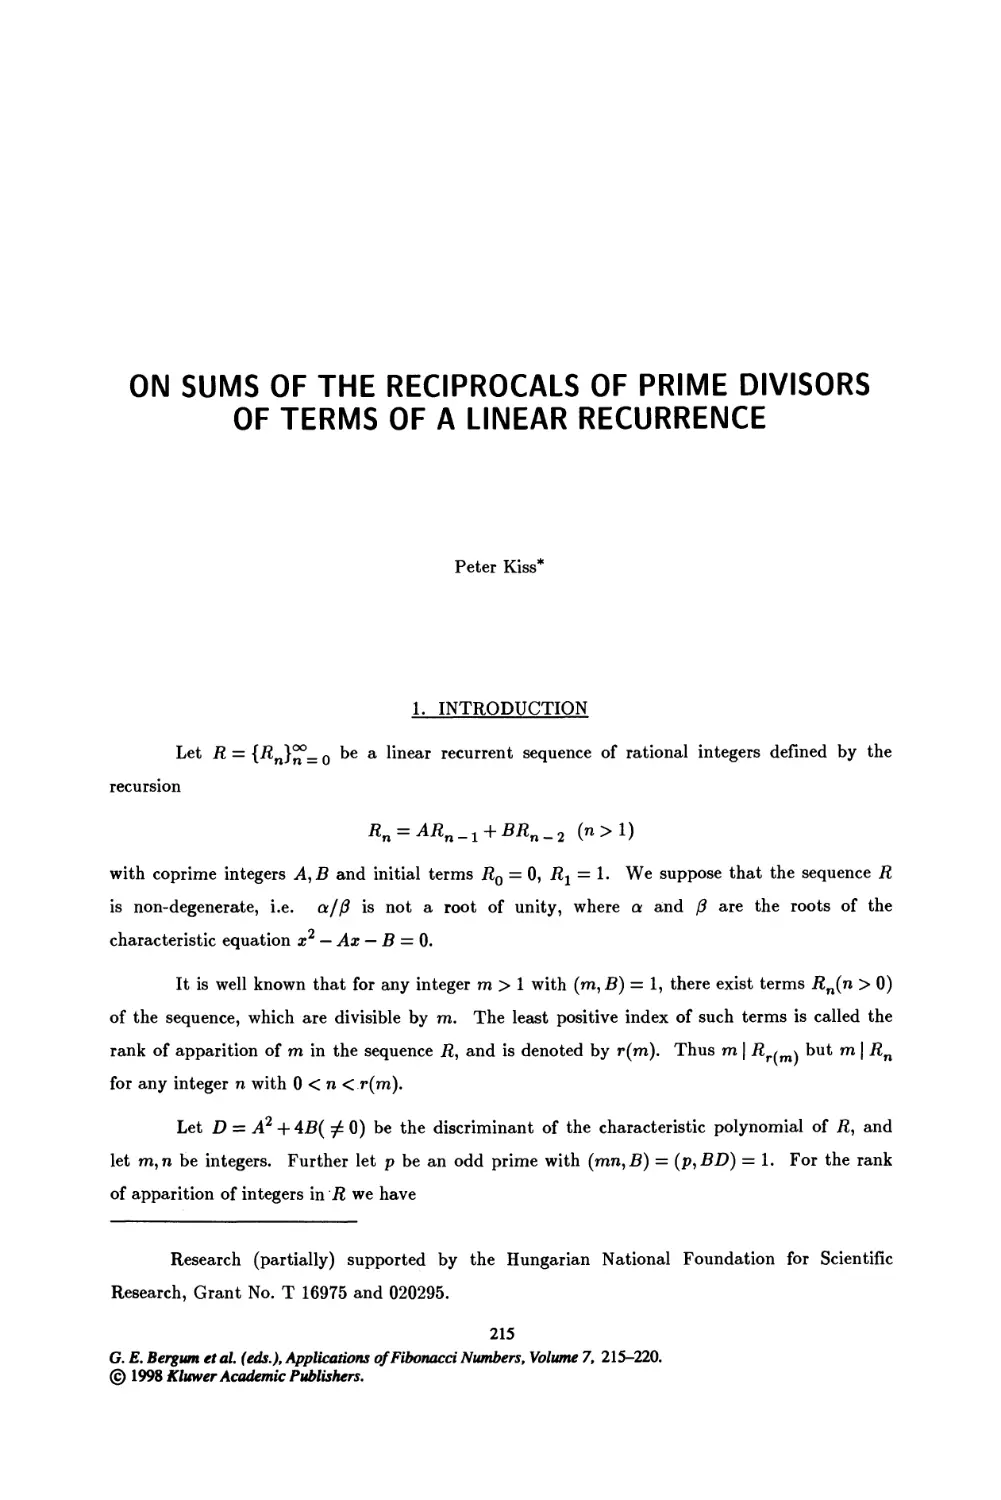 25. On Sums of the Reciprocals of Prime Divisors of Terms of a Linear Recurrence